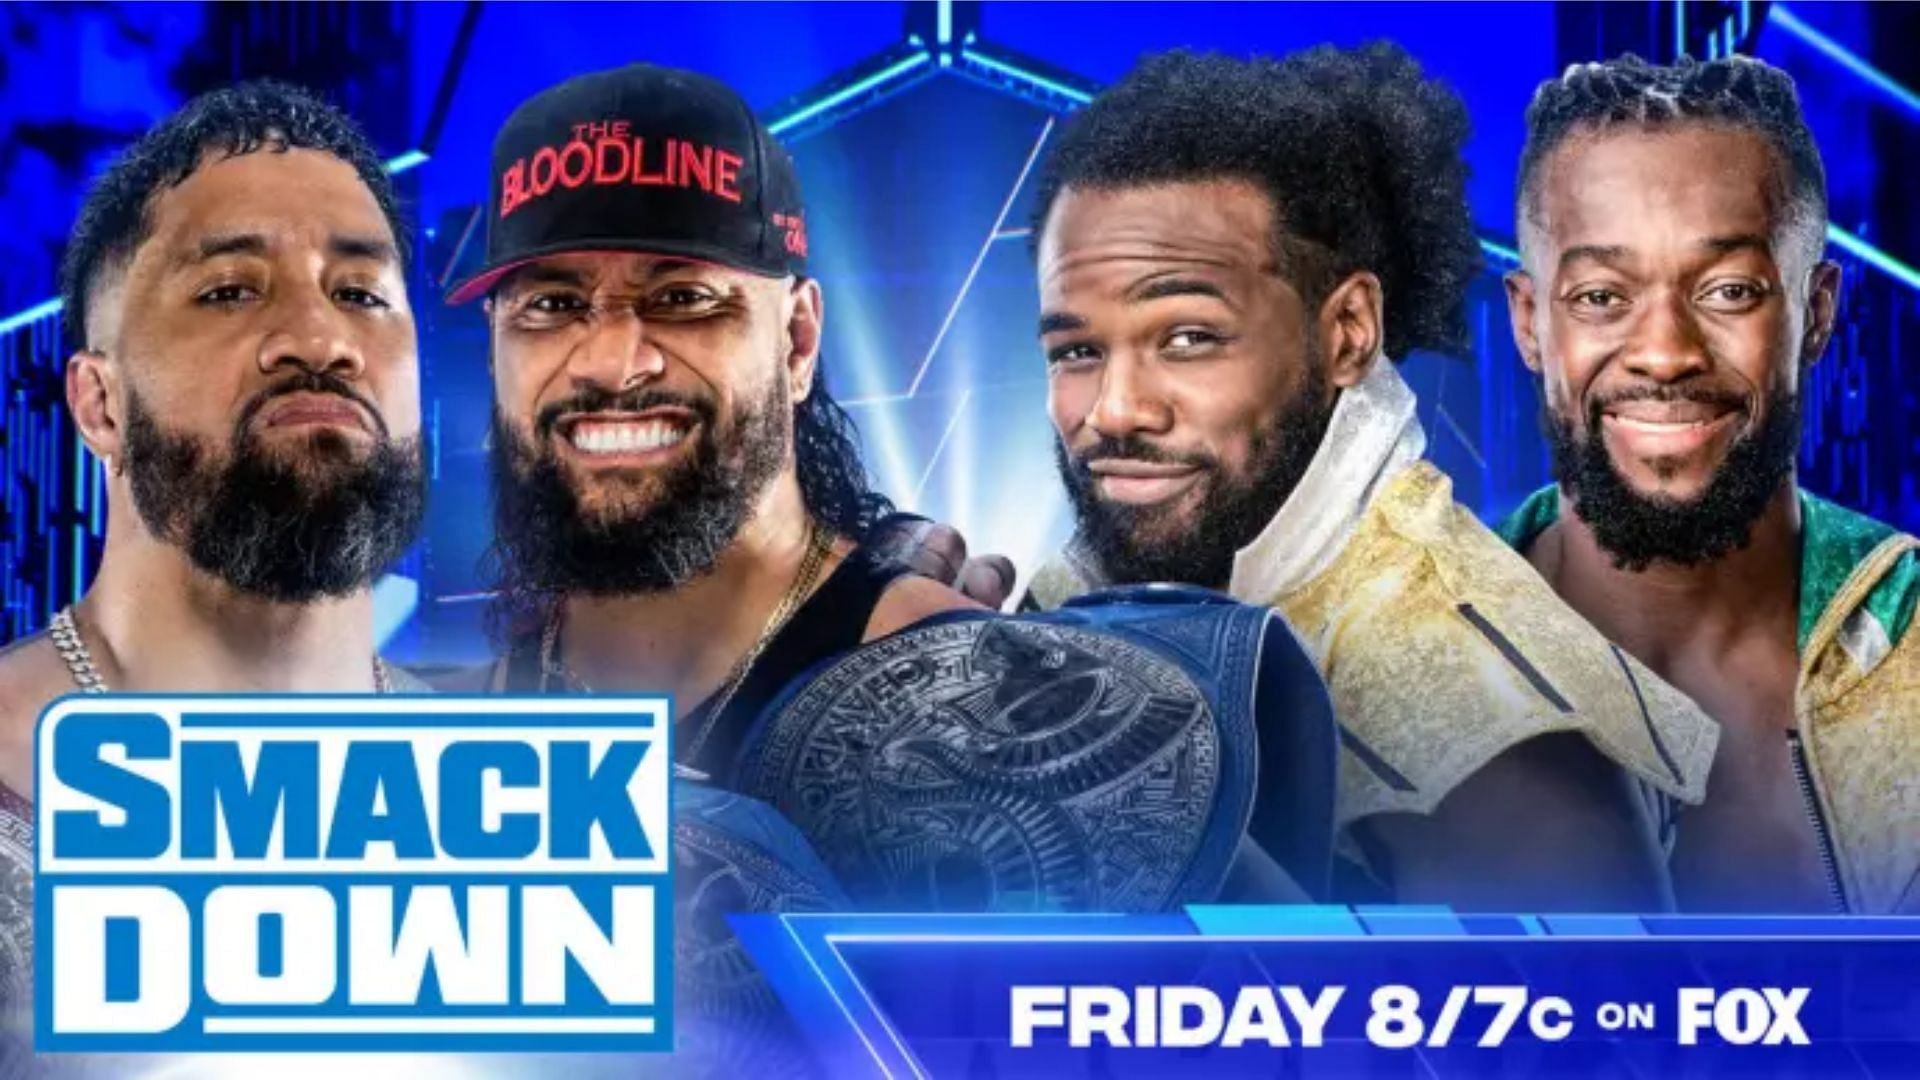 The Usos and The New Day will wage war on SmackDown